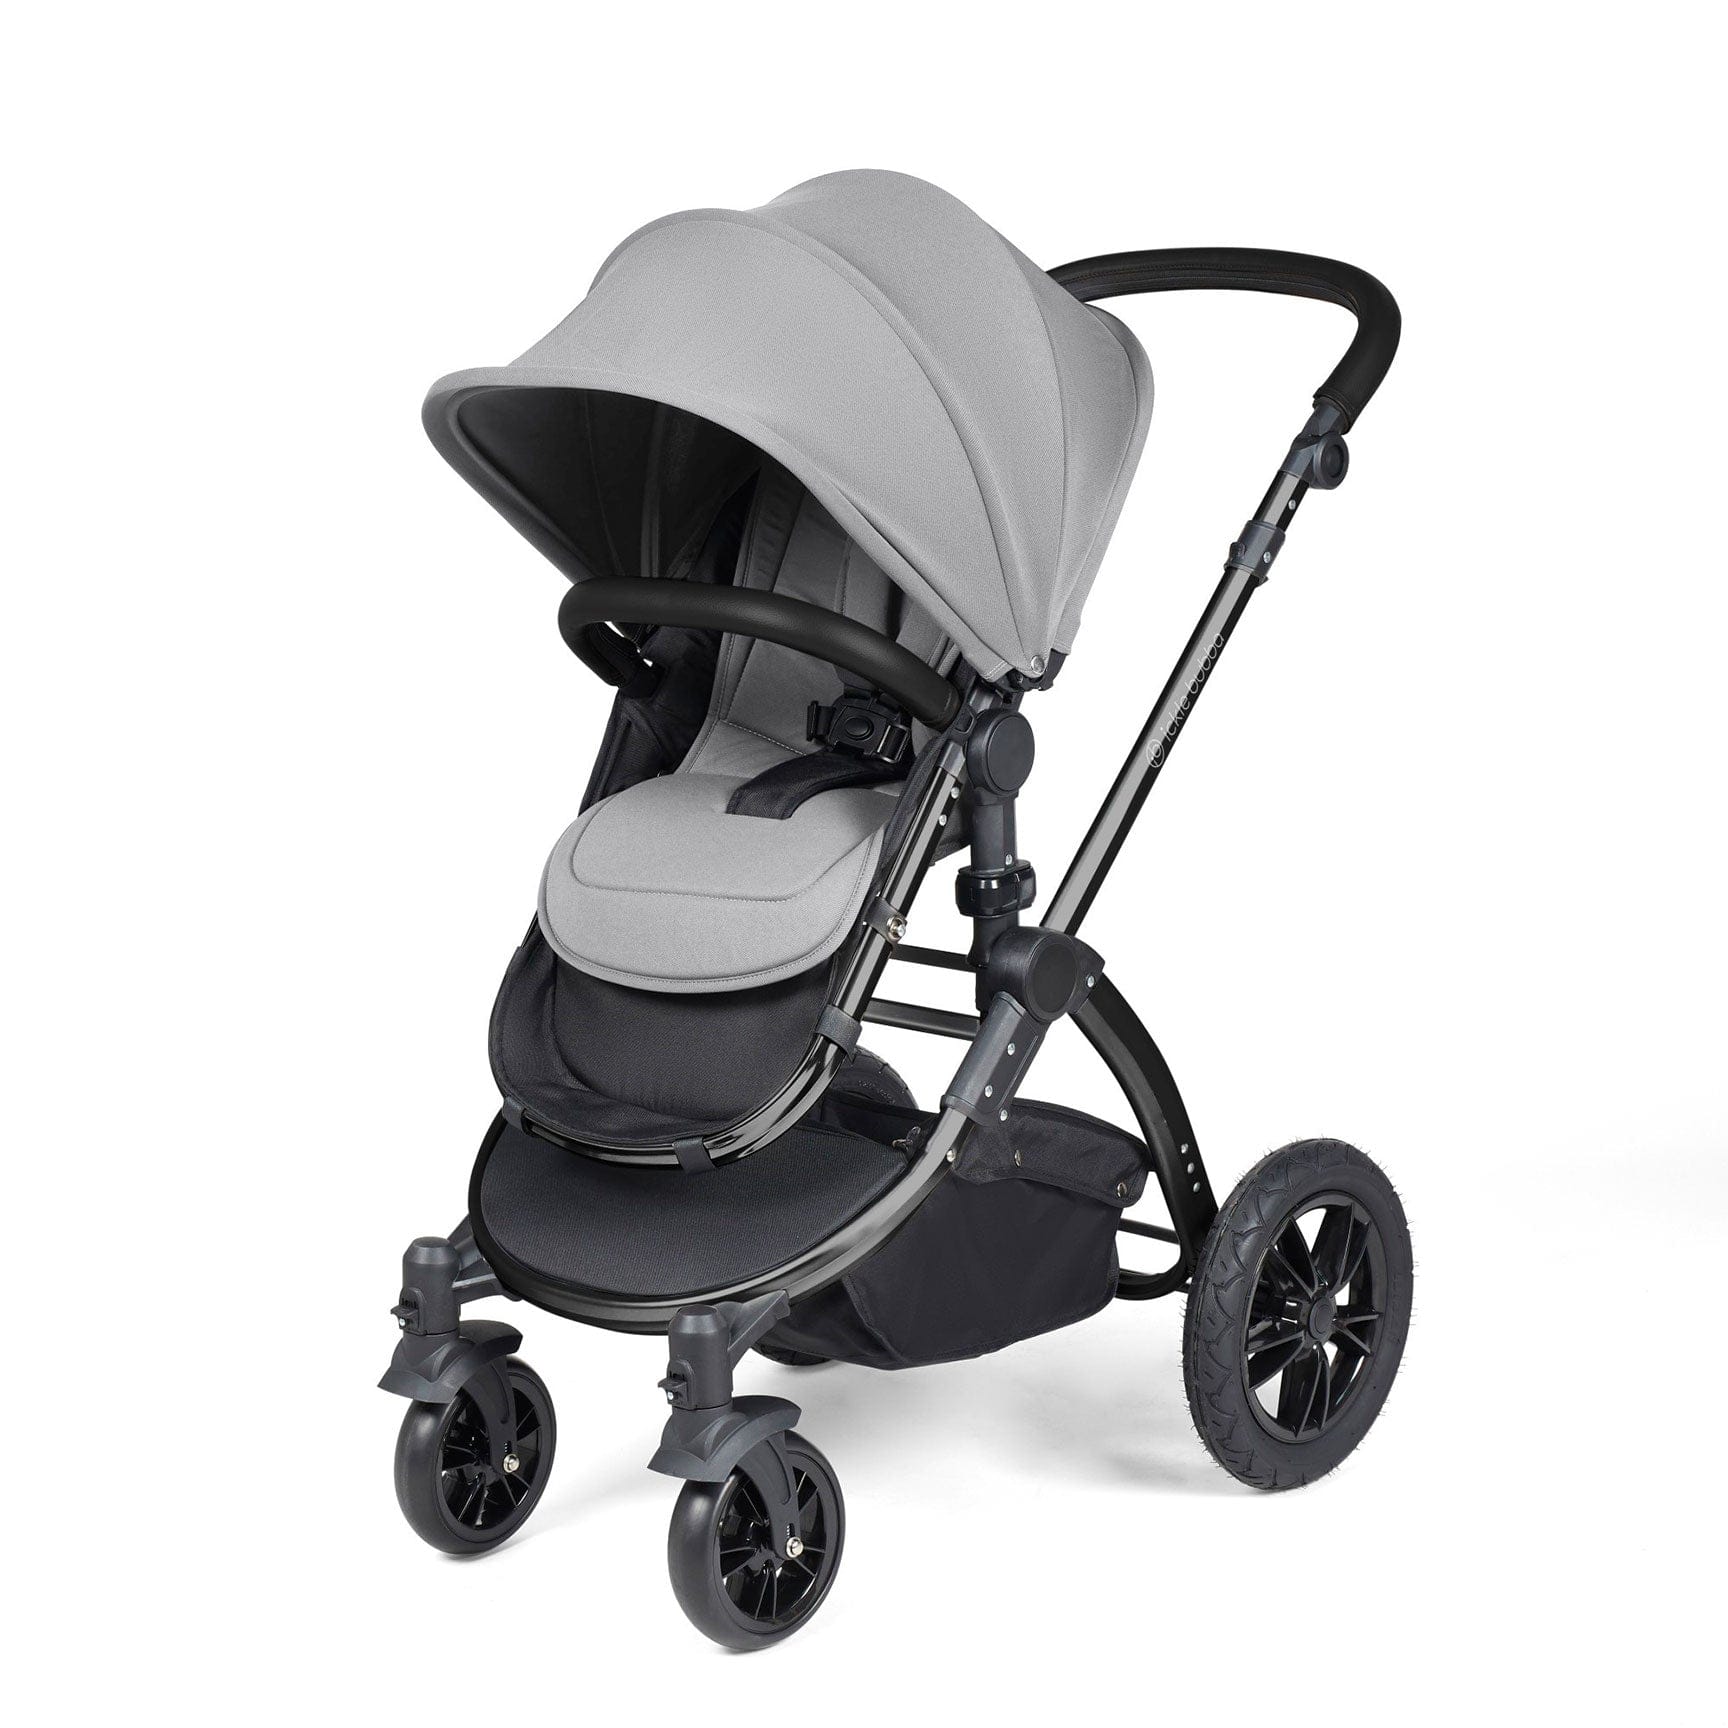 Ickle Bubba travel systems Ickle Bubba Stomp Luxe All-in-One Travel System with Isofix Base - Black/Pearl Grey/Black 10-011-300-210